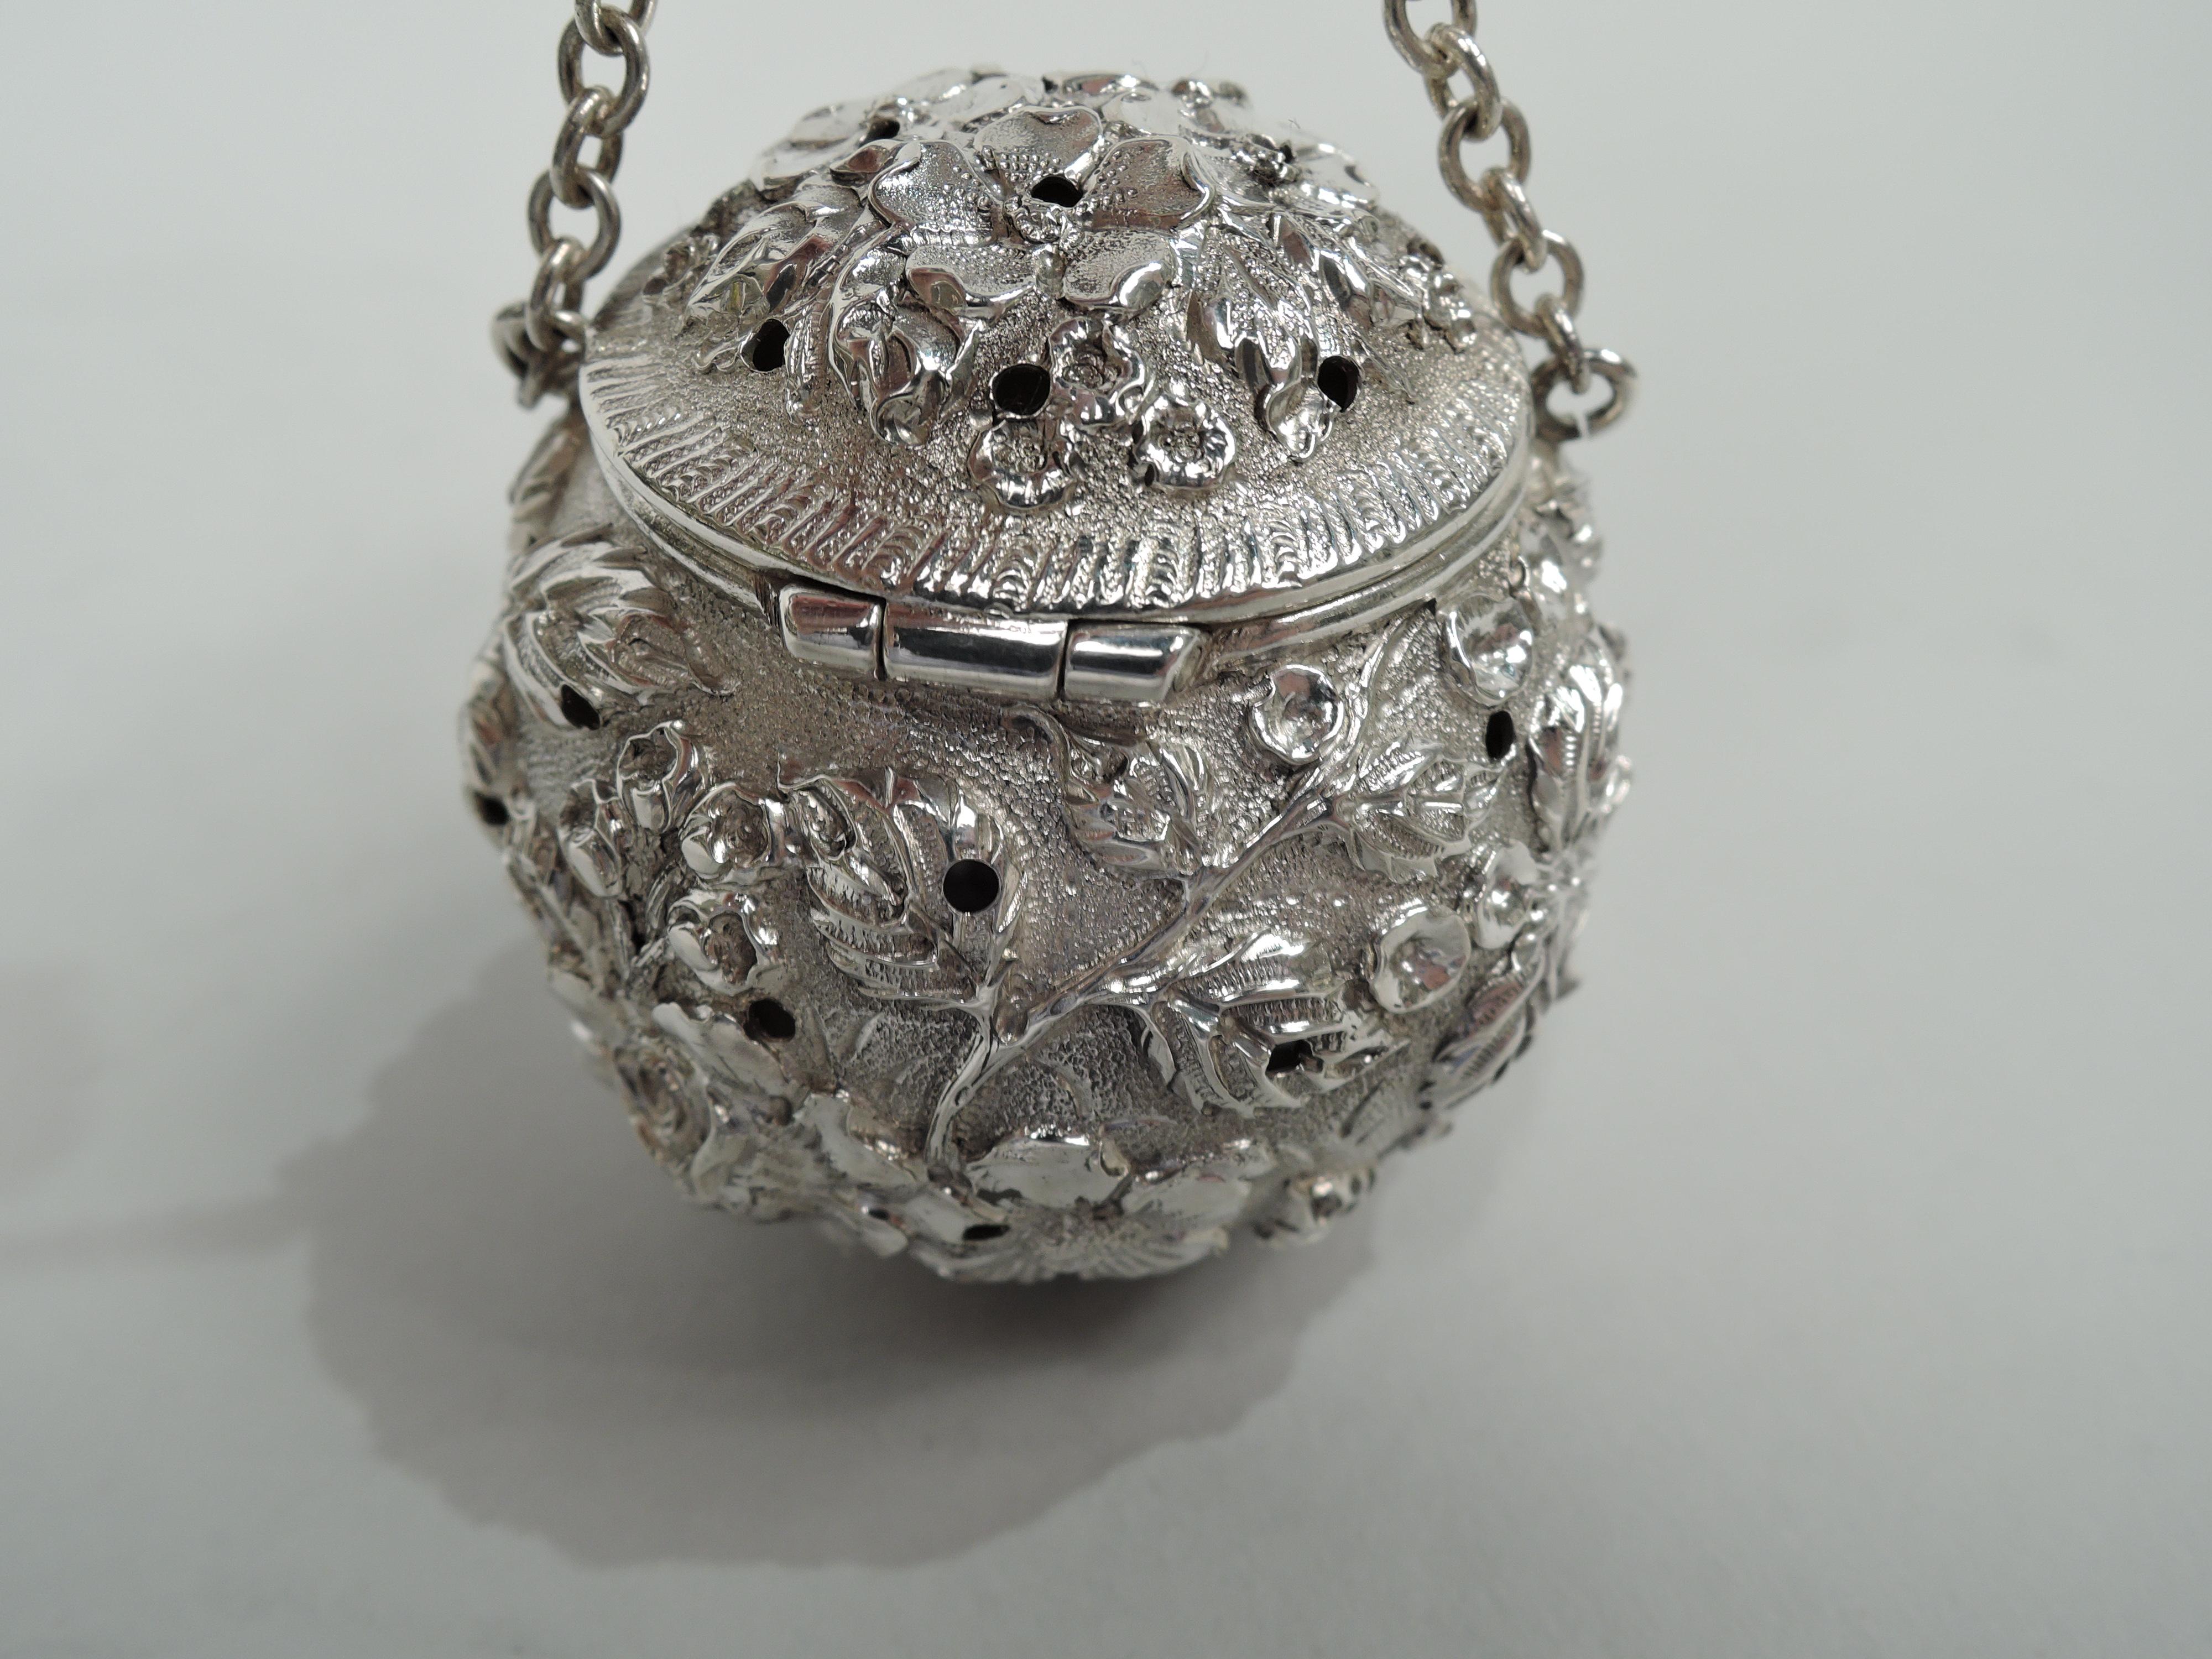 Edwardian Finest Quality Stieff Baltimore Repousse Tea Ball Infuser